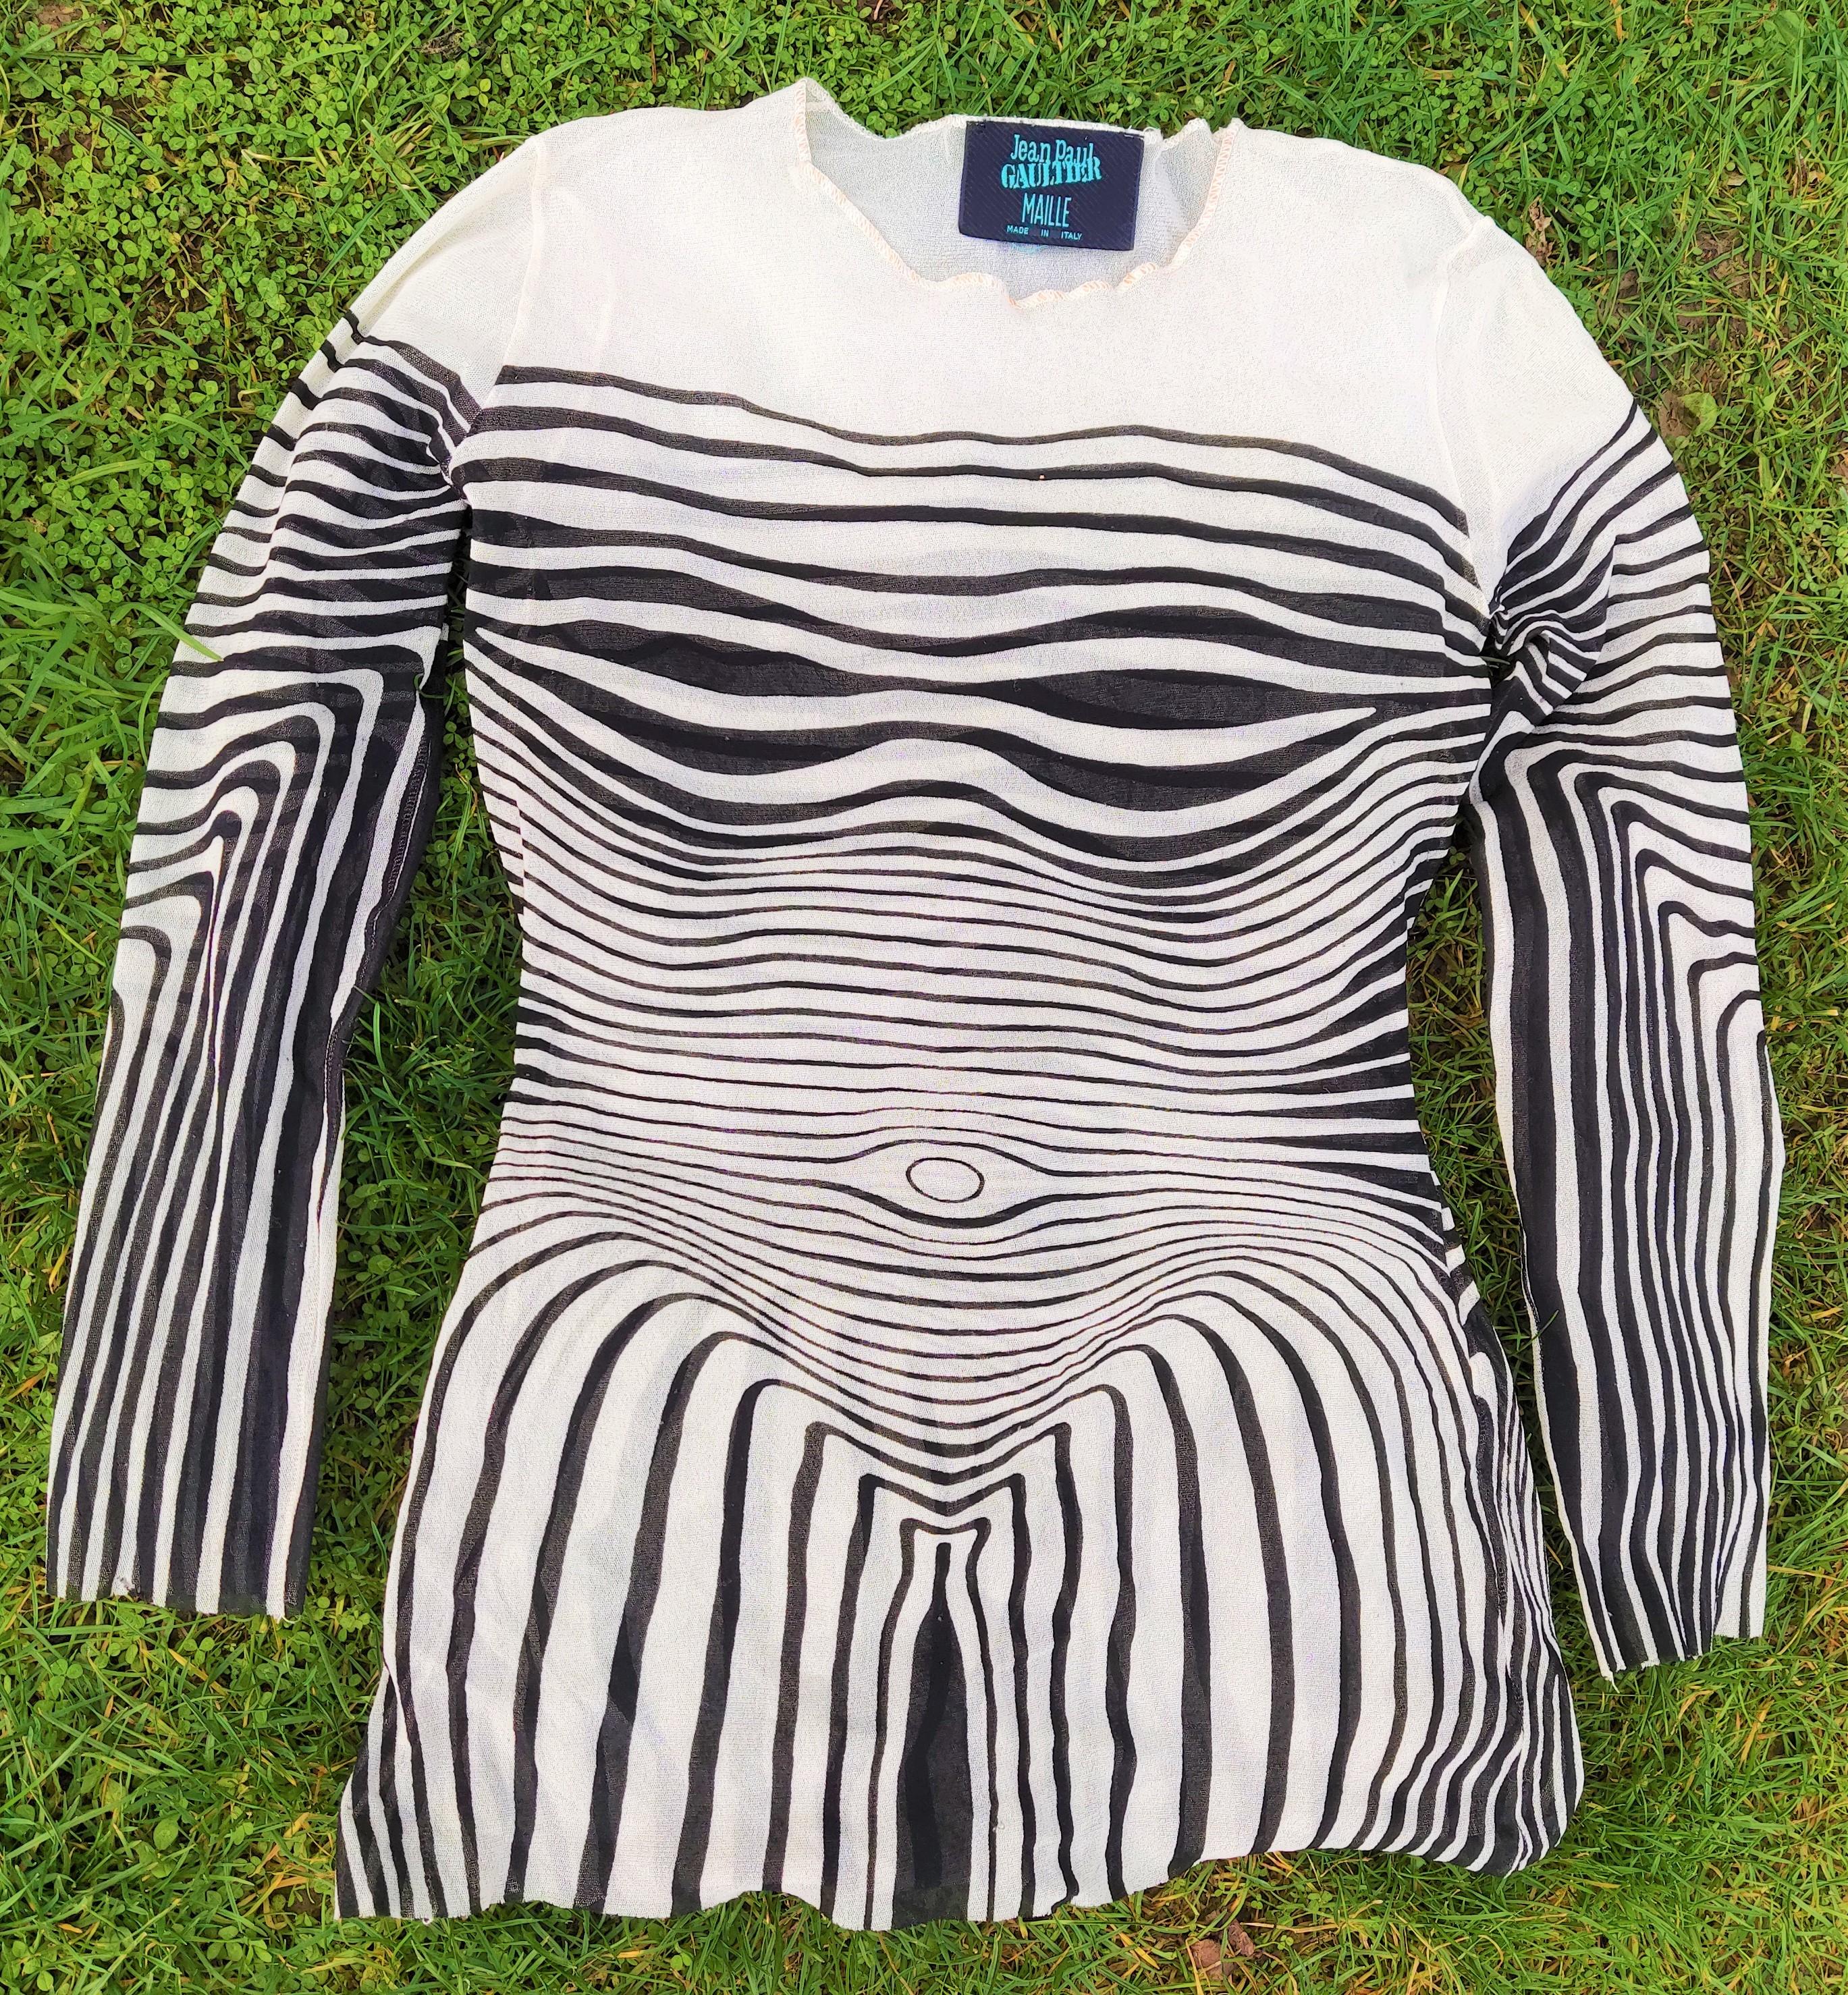 Iconic Optical Illusion Top by Jean Paul Gaultier!
1996 Spring Summer Collection!

One of the most iconic Jean-Paul Gaultier Prints, initially showed at Spring-Summer 1996 collection, which is now a part of MET Costume Institute’s Archive and